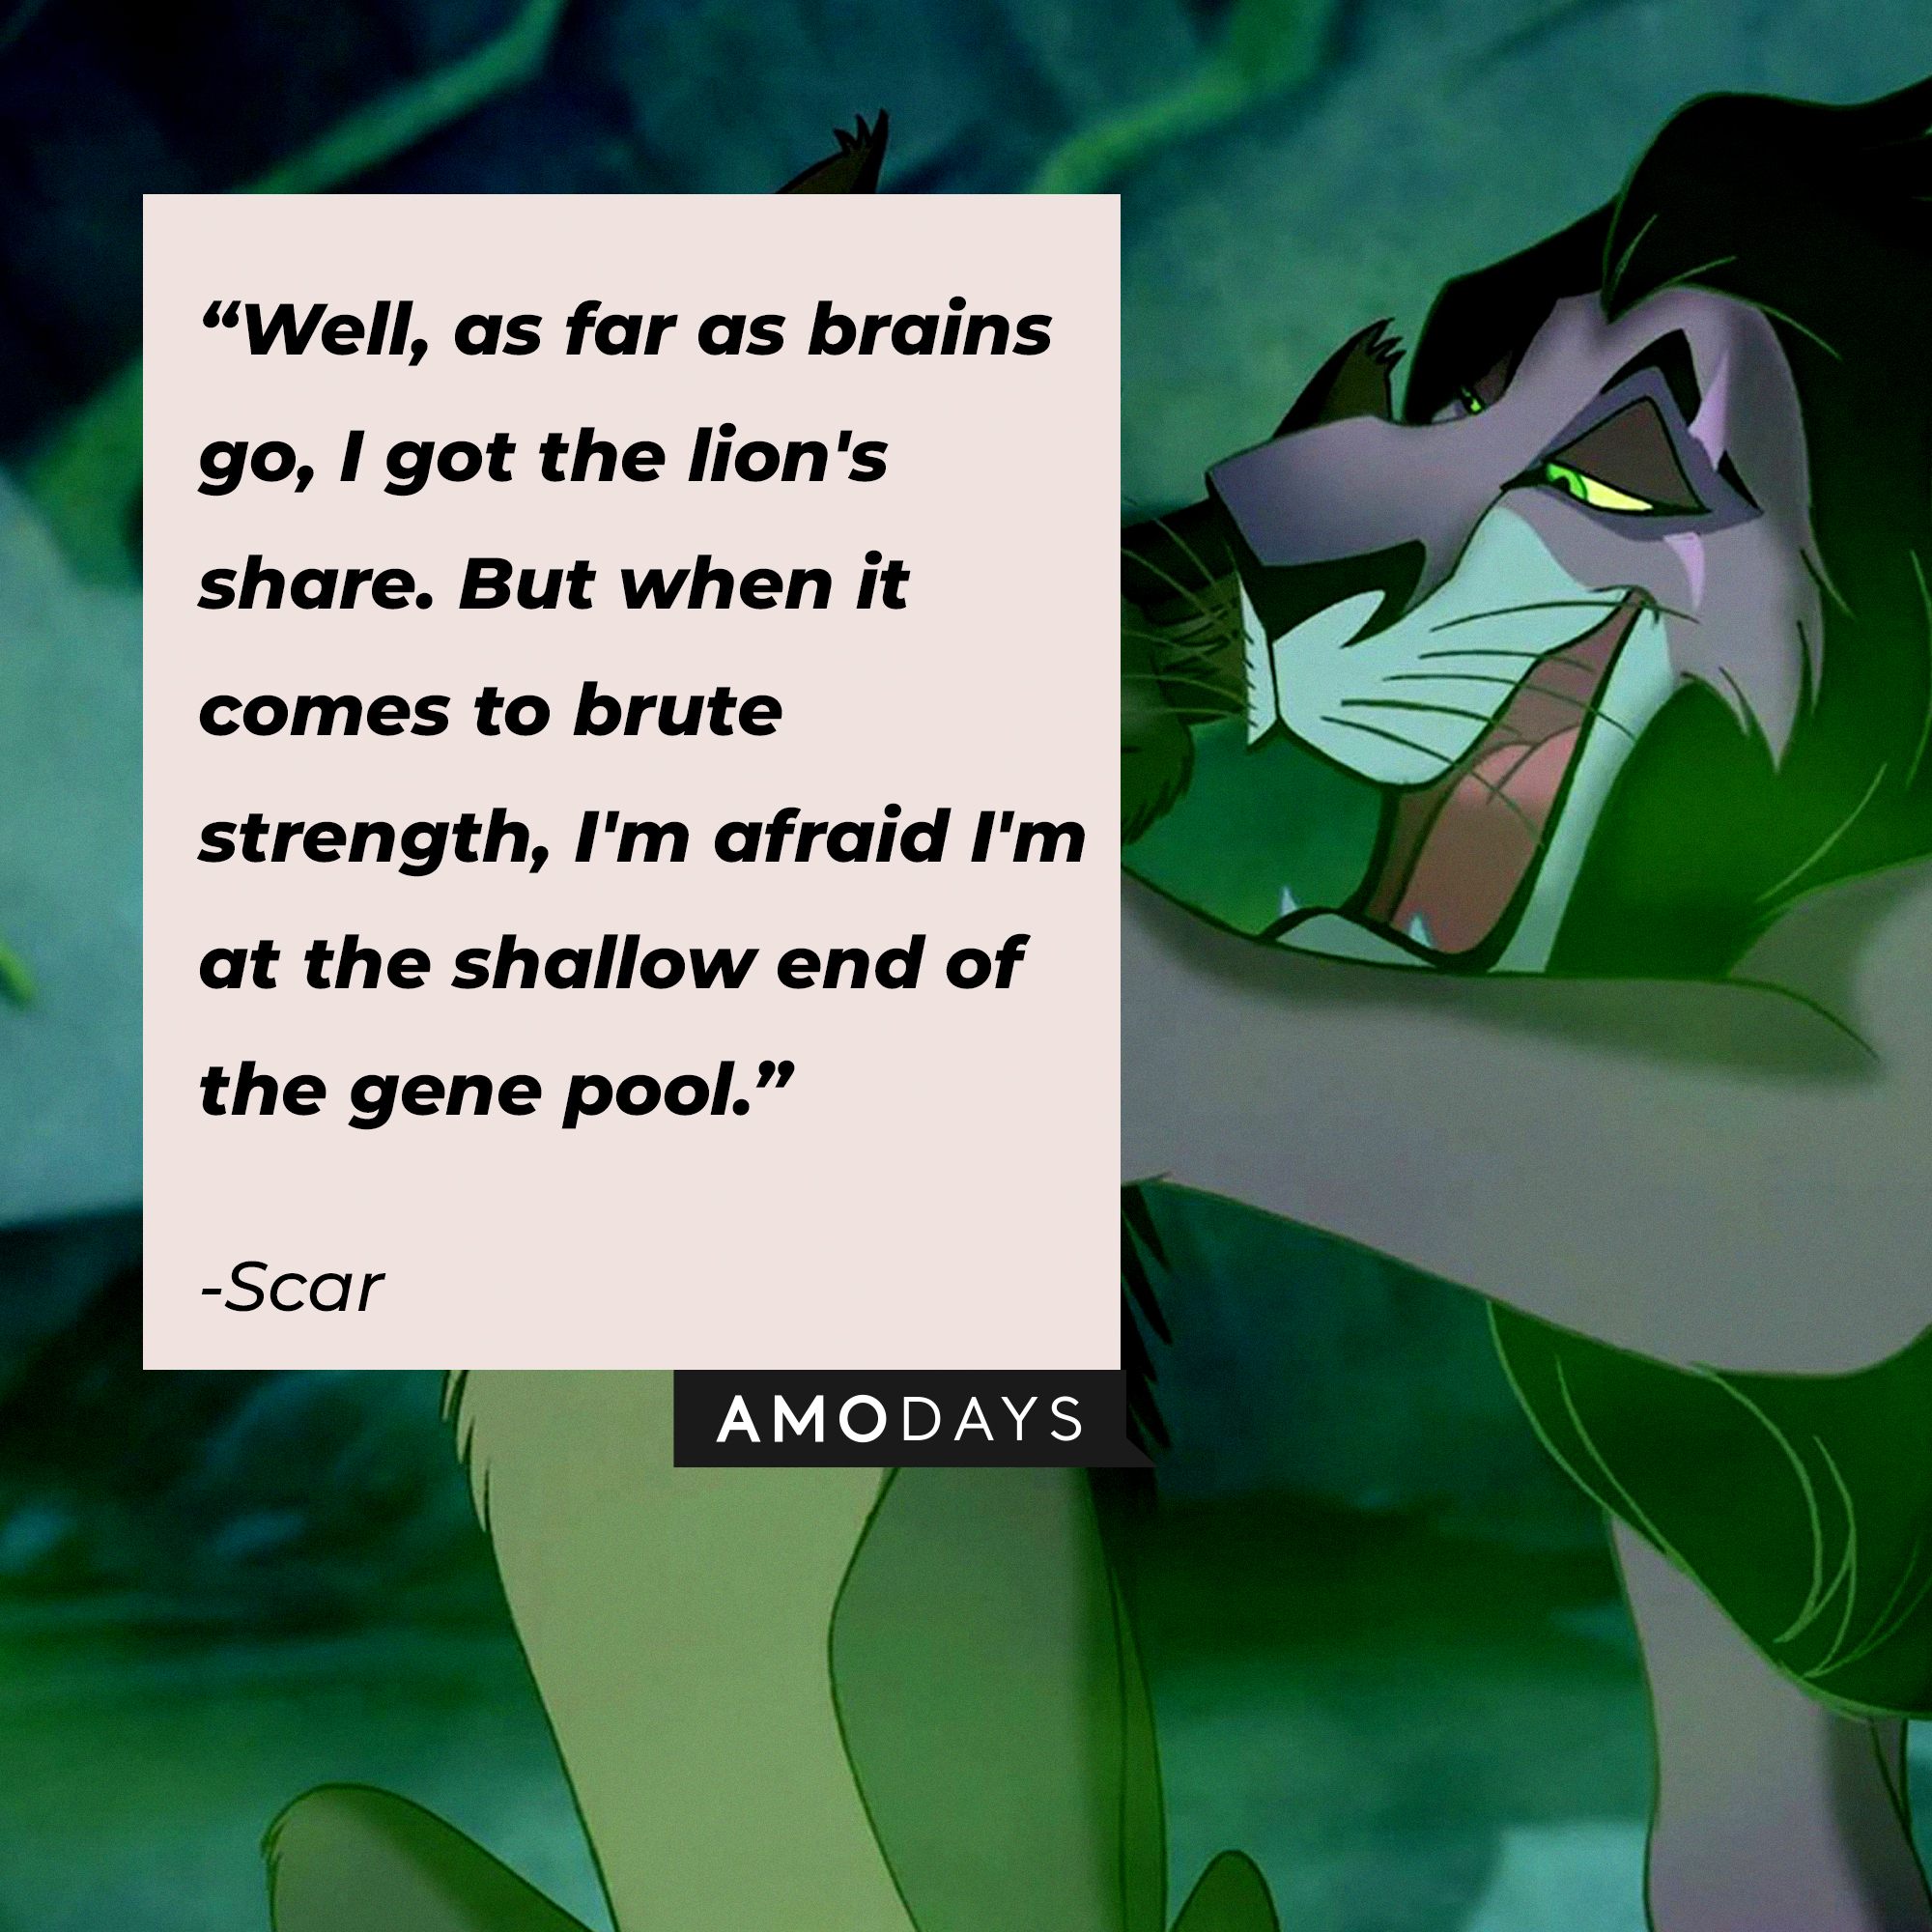 A photo of Scar with the quote, "Well, as far as brains go, I got the lion's share. But when it comes to brute strength, I'm afraid I'm at the shallow end of the gene pool." | Source: Facebook/DisneyTheLionKing